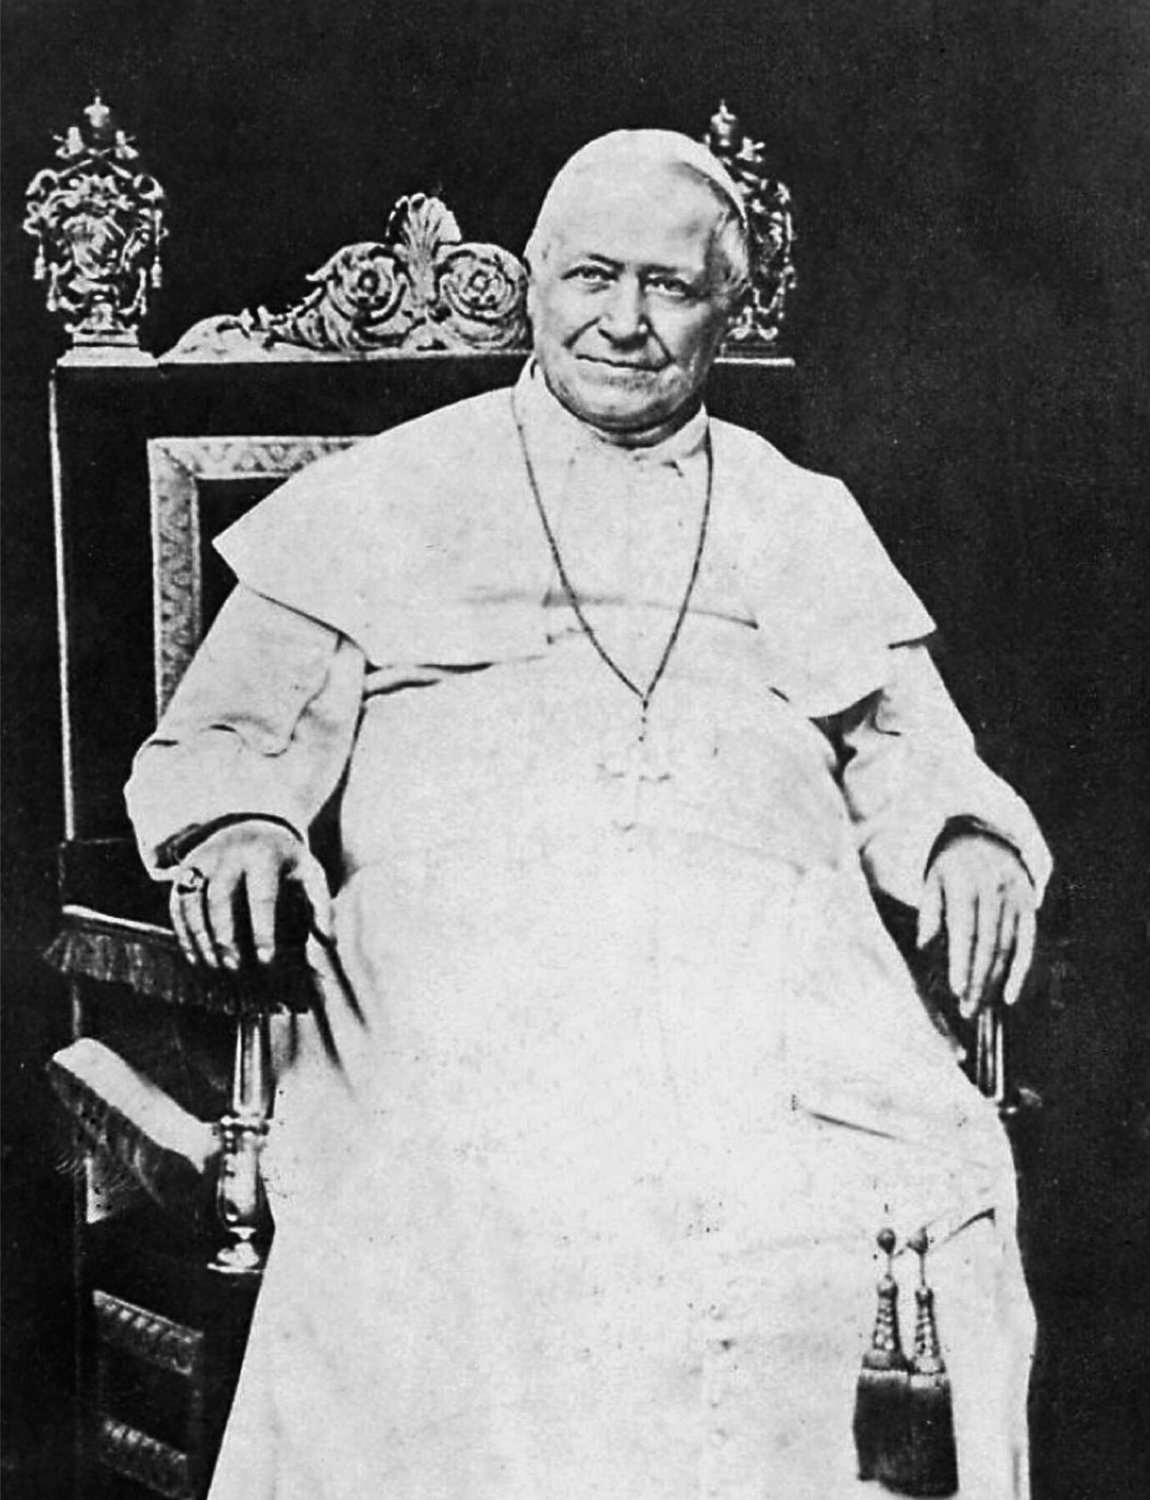 On February 16, 1872, Pope Pius IX, signed the papal bull which officially created the Diocese of Providence.